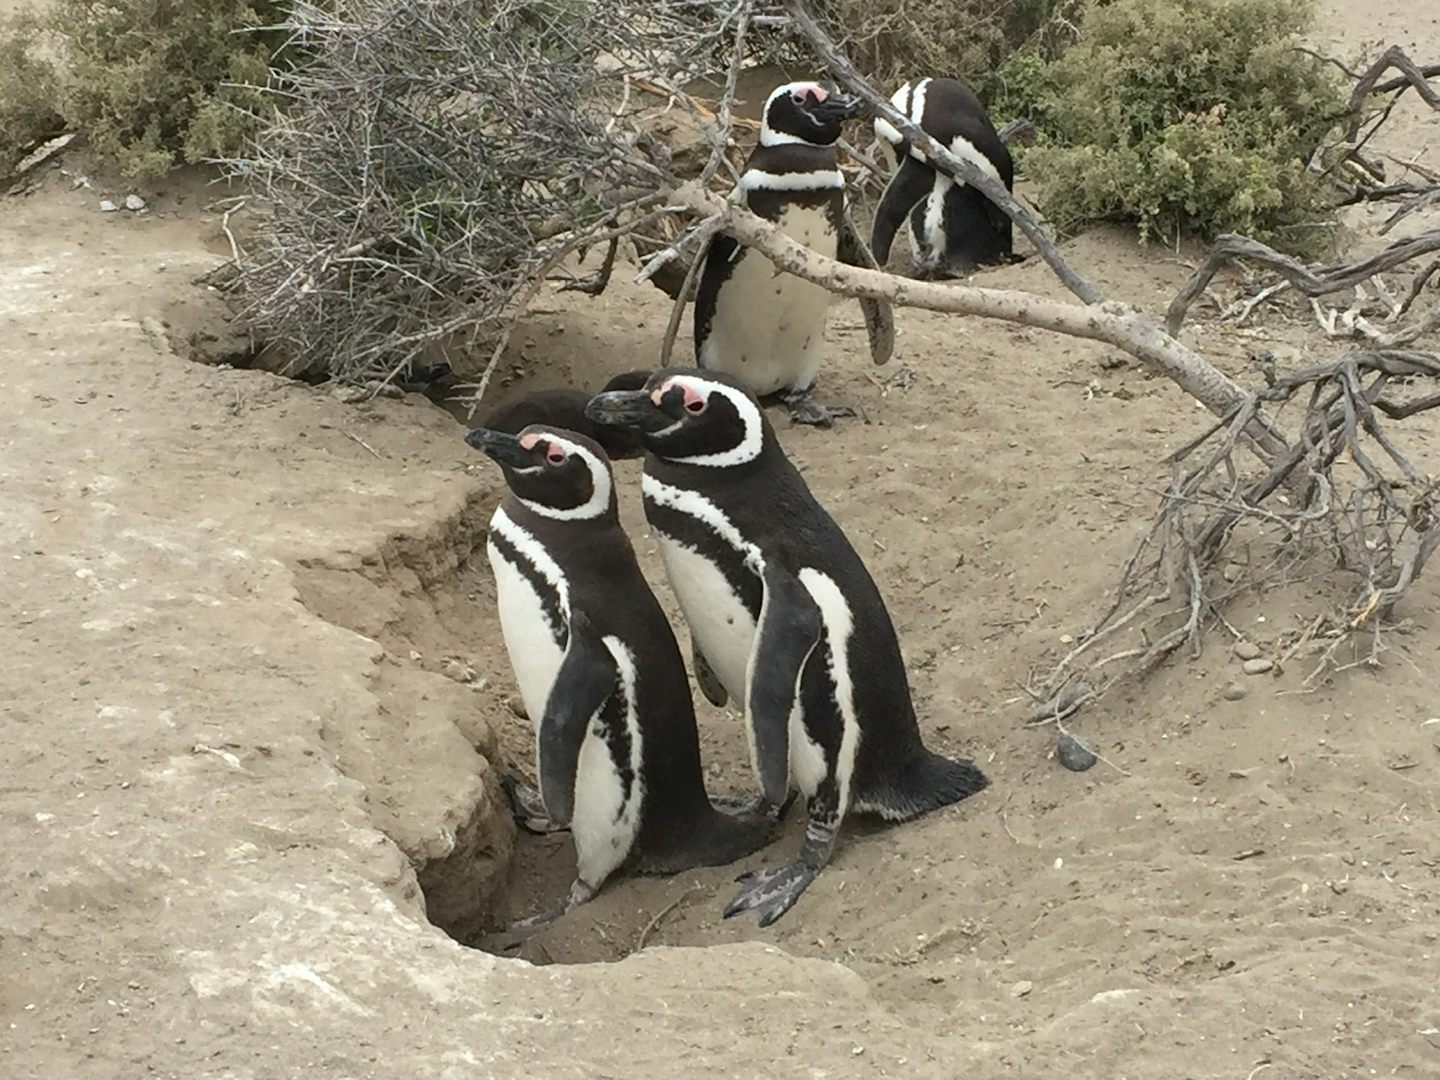 We went to see the Penguins, a highlight of the cruise